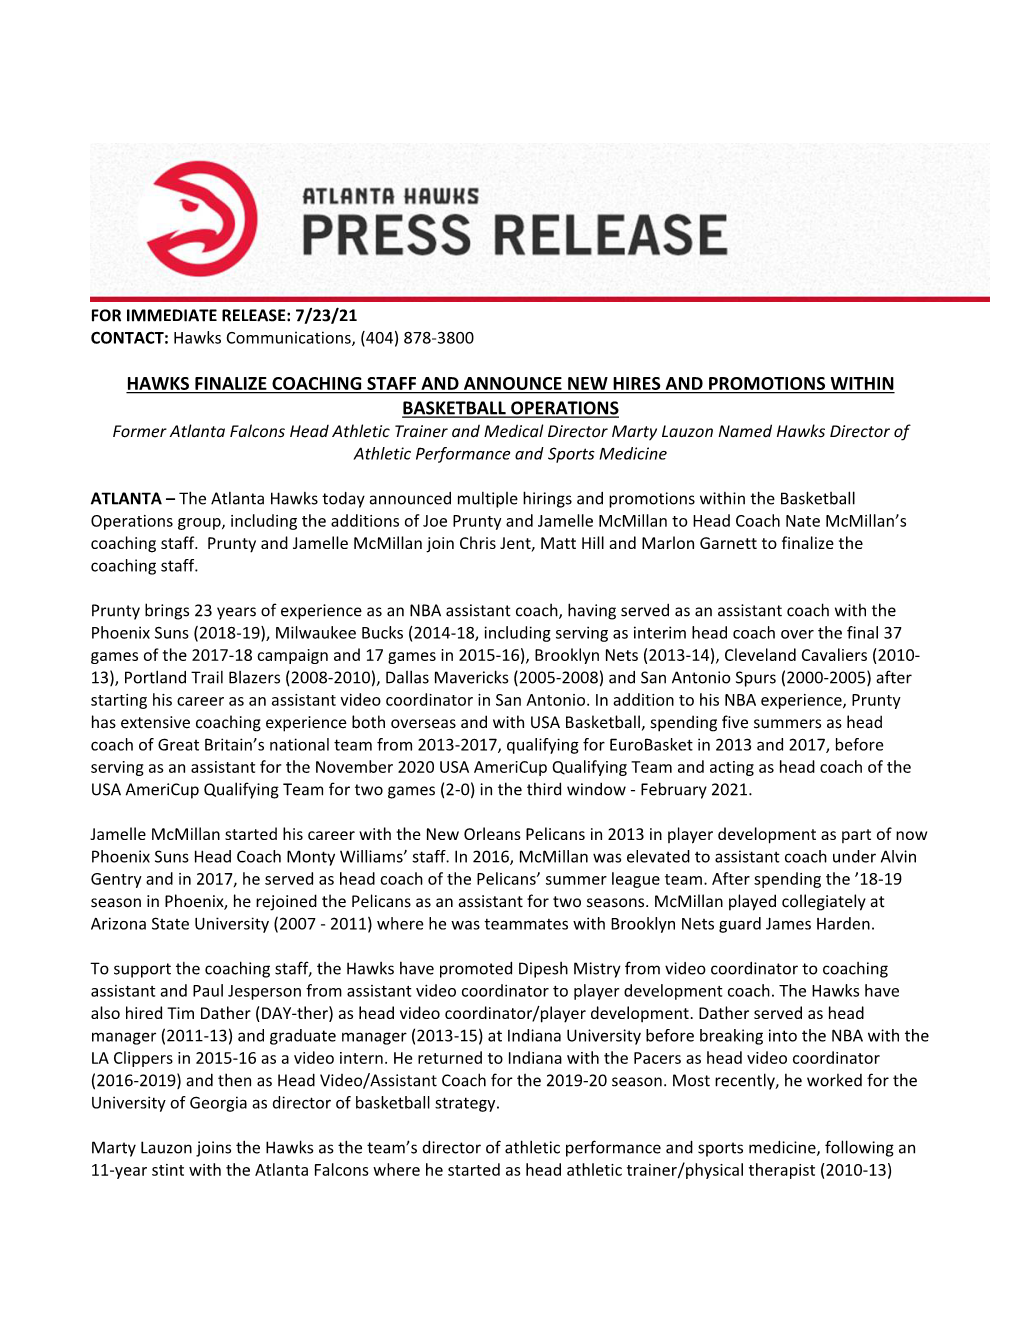 Hawks Finalize Coaching Staff and Announce New Hires and Promotions Within Basketball Operations